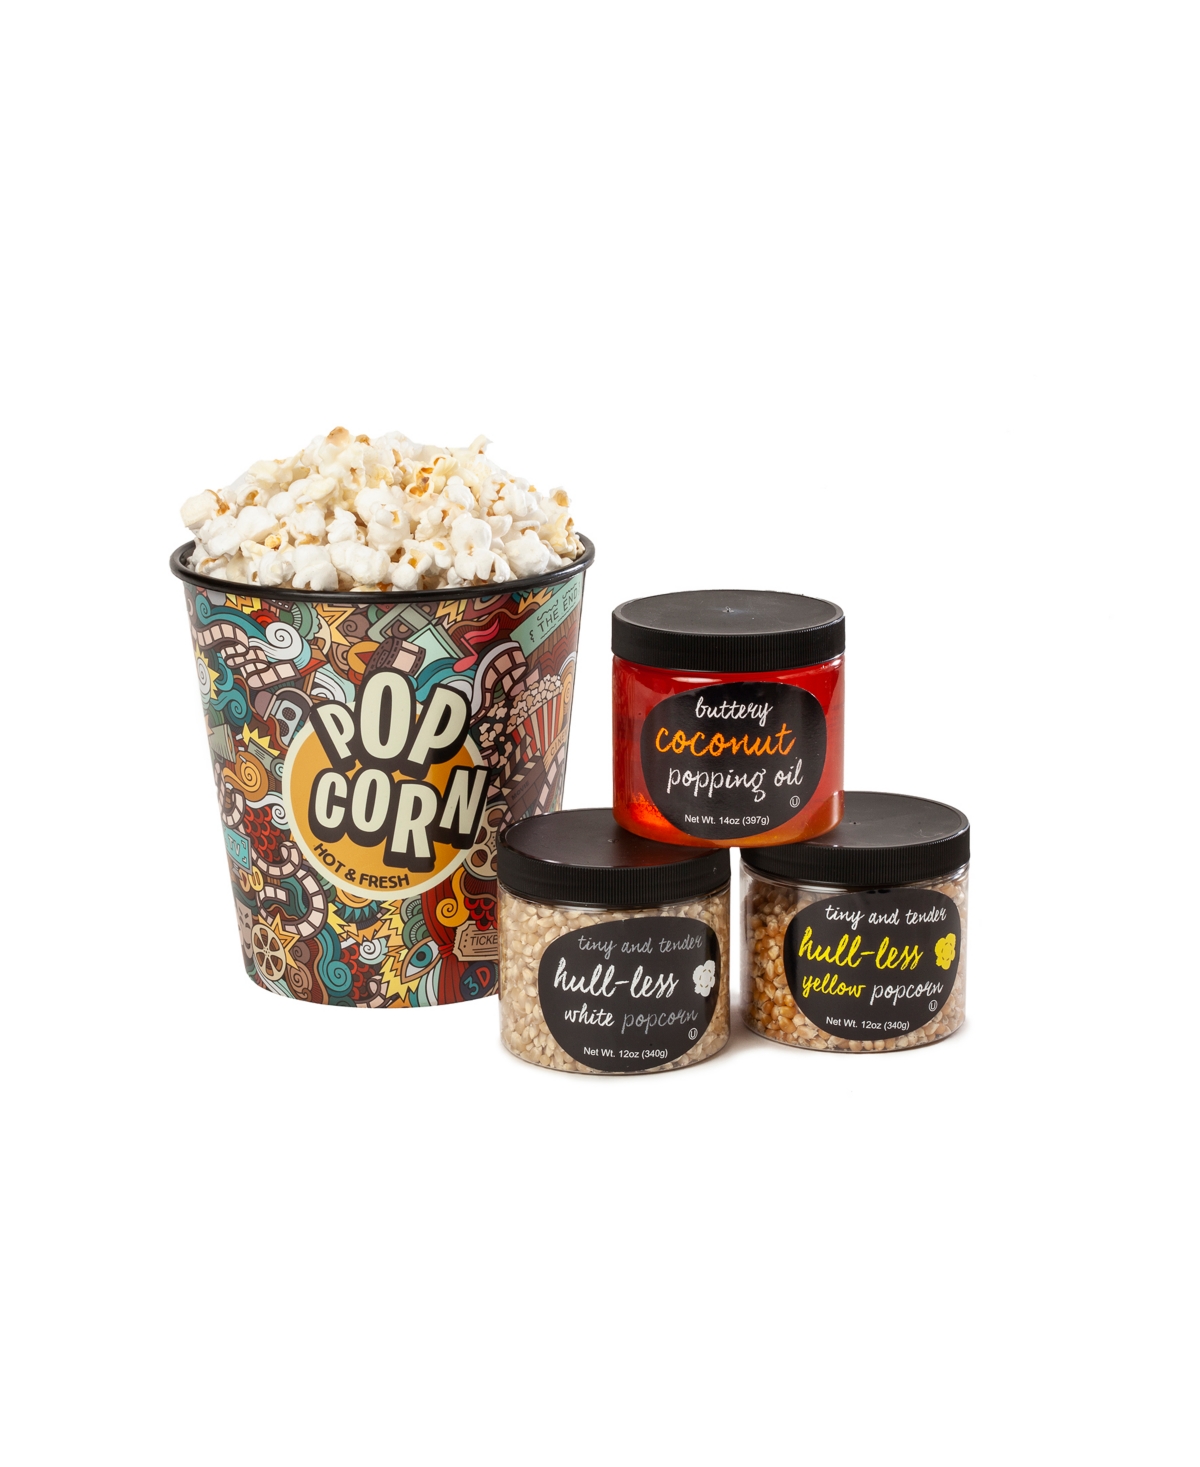 Wabash Valley Farms Deluxe Hull-less Popcornâ Kit, Set Of 4 In No Color